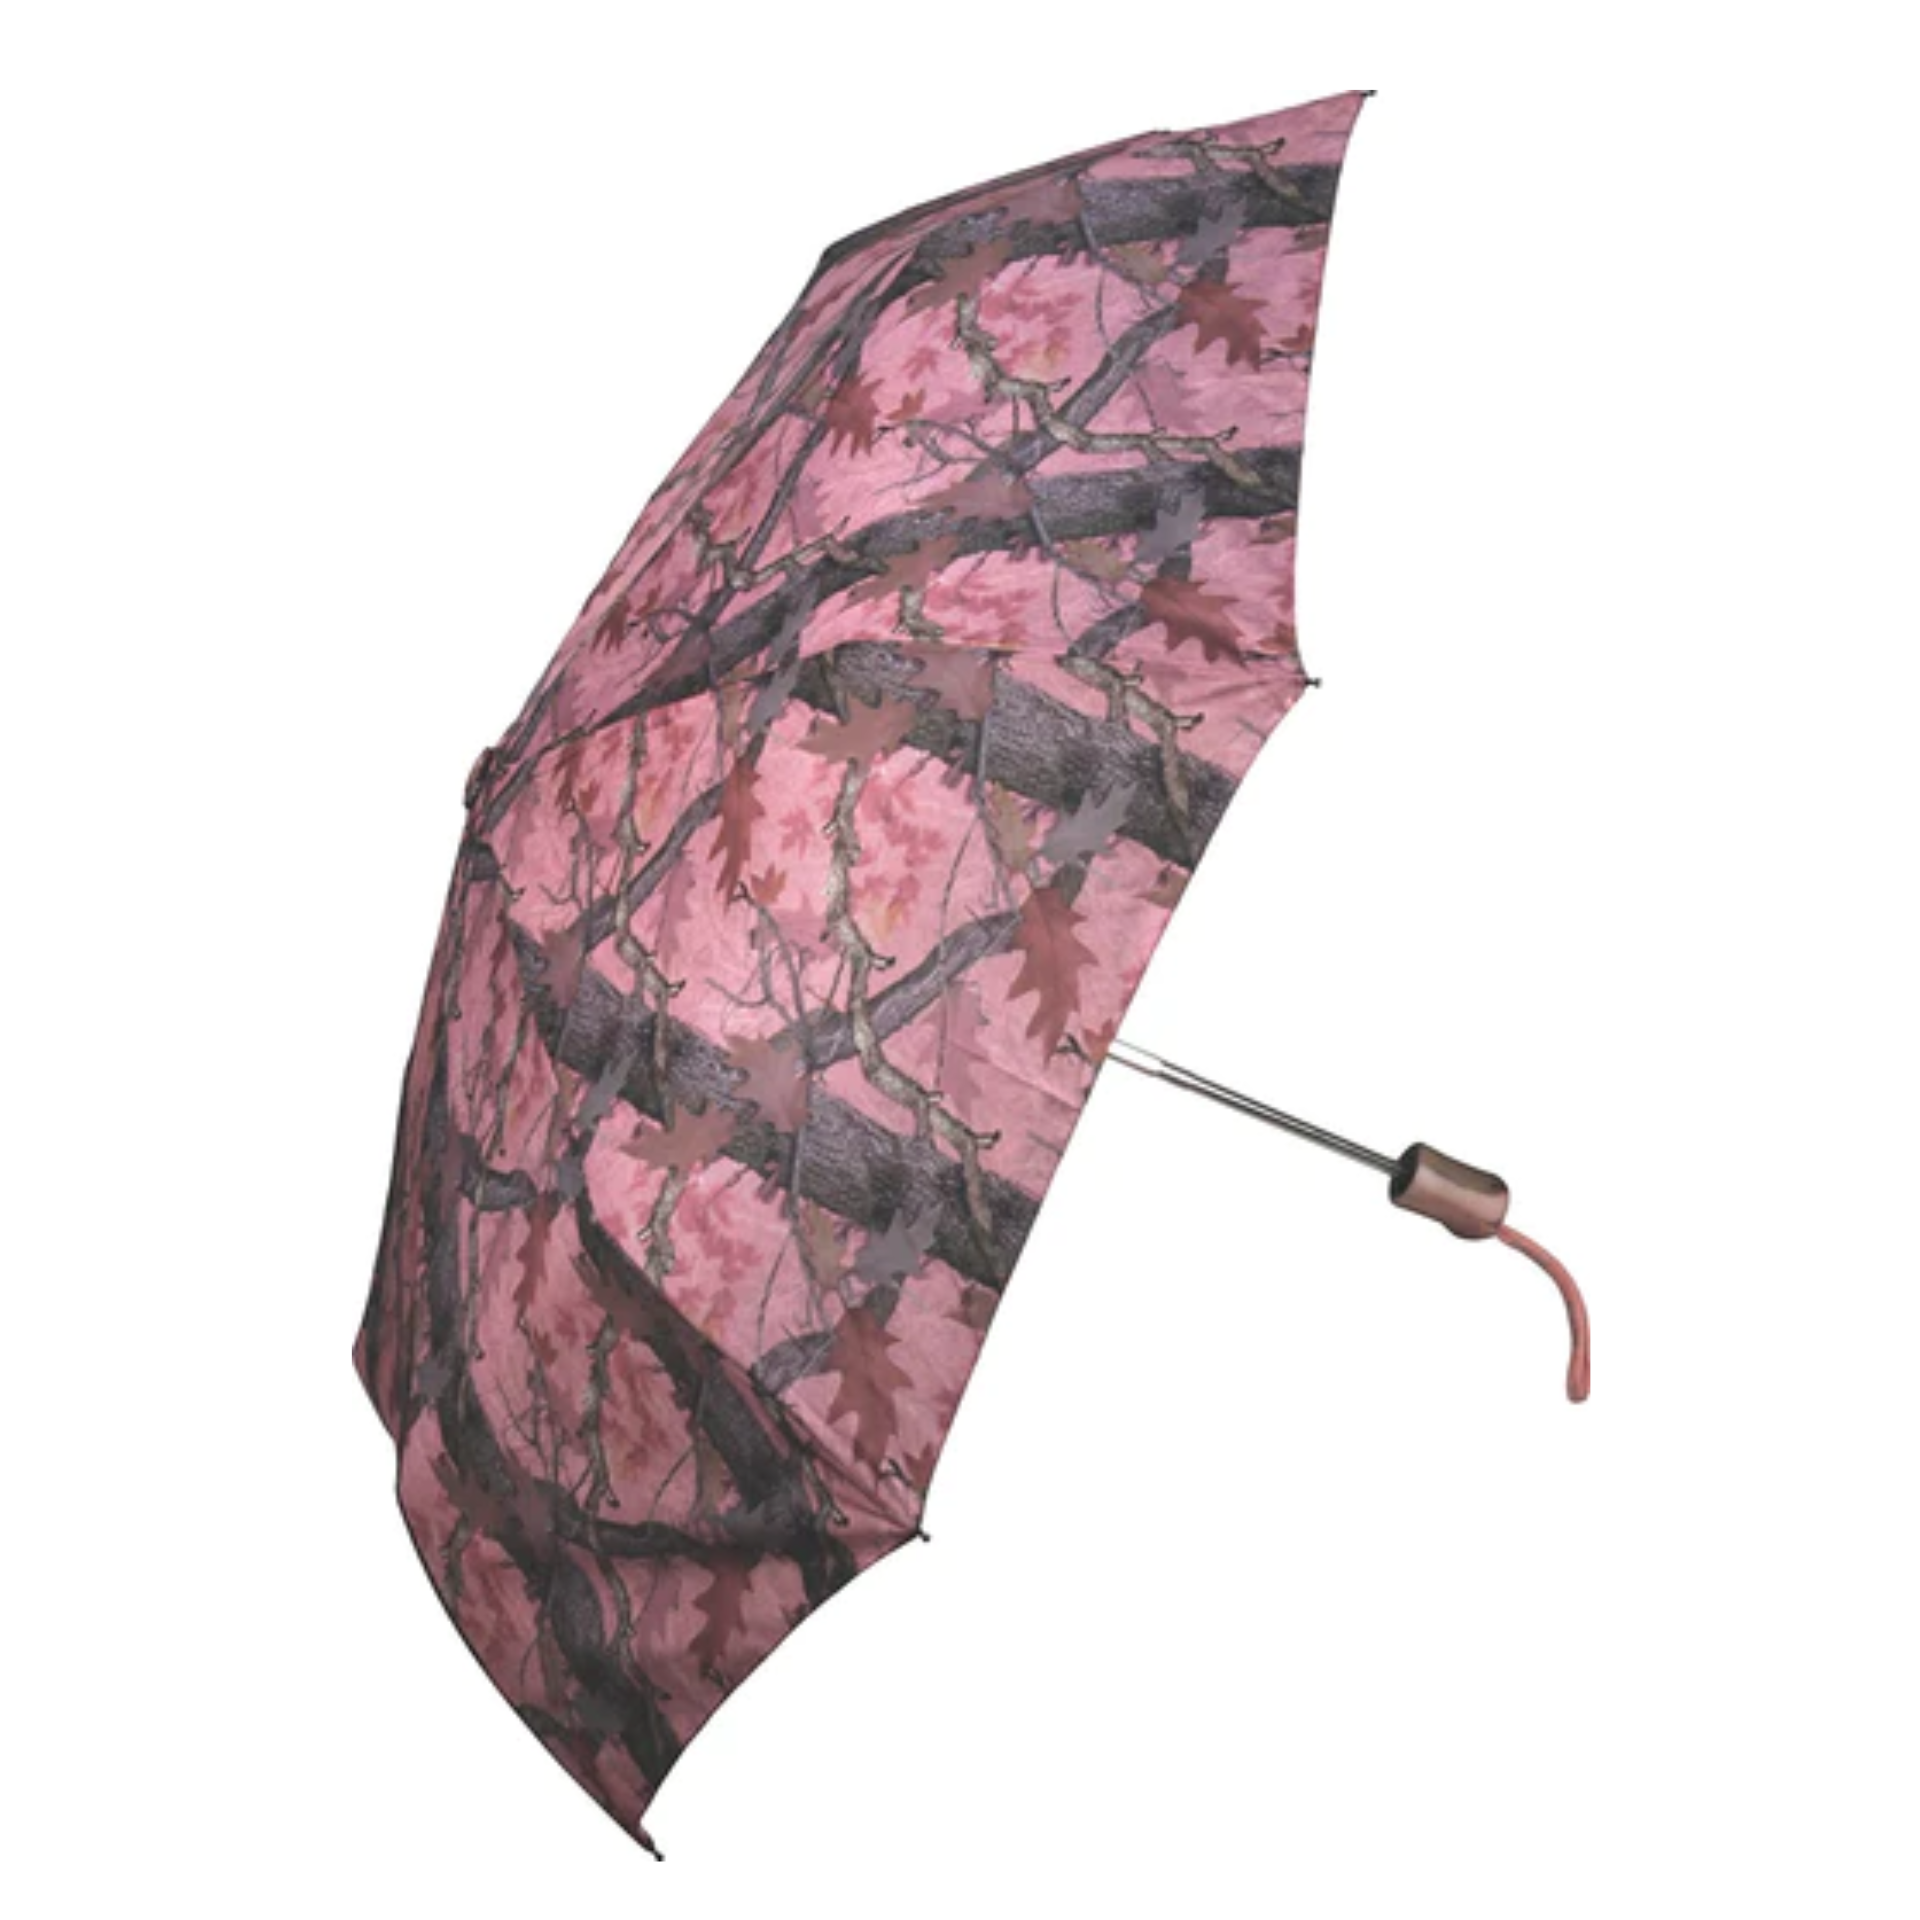 Rivers Edge Products Deluxe Windproof Pink Umbrella